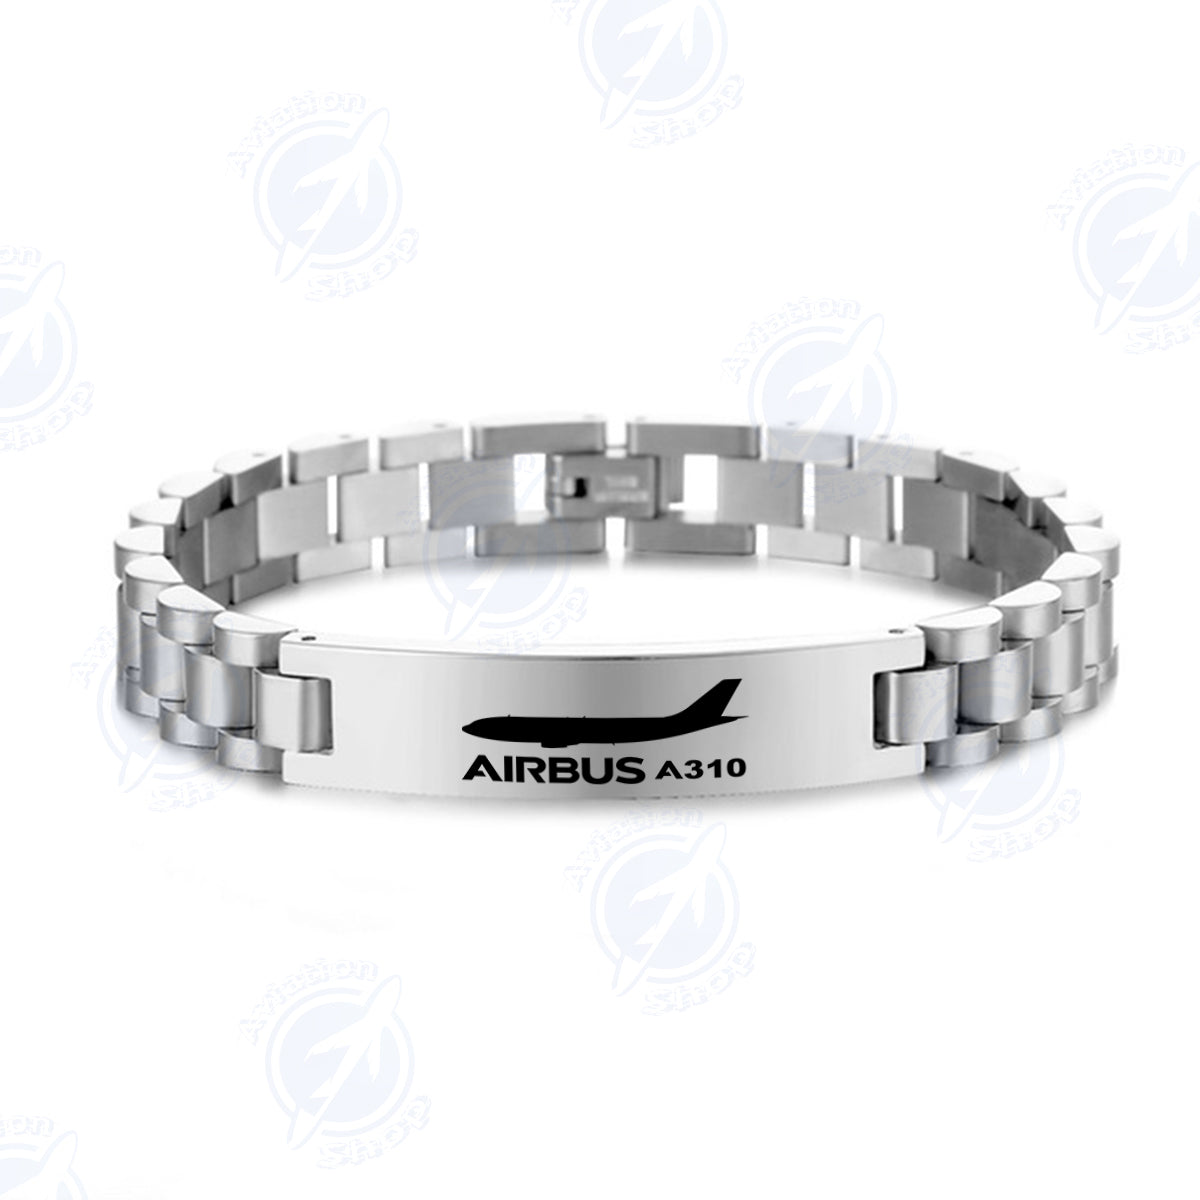 The Airbus A310 Designed Stainless Steel Chain Bracelets